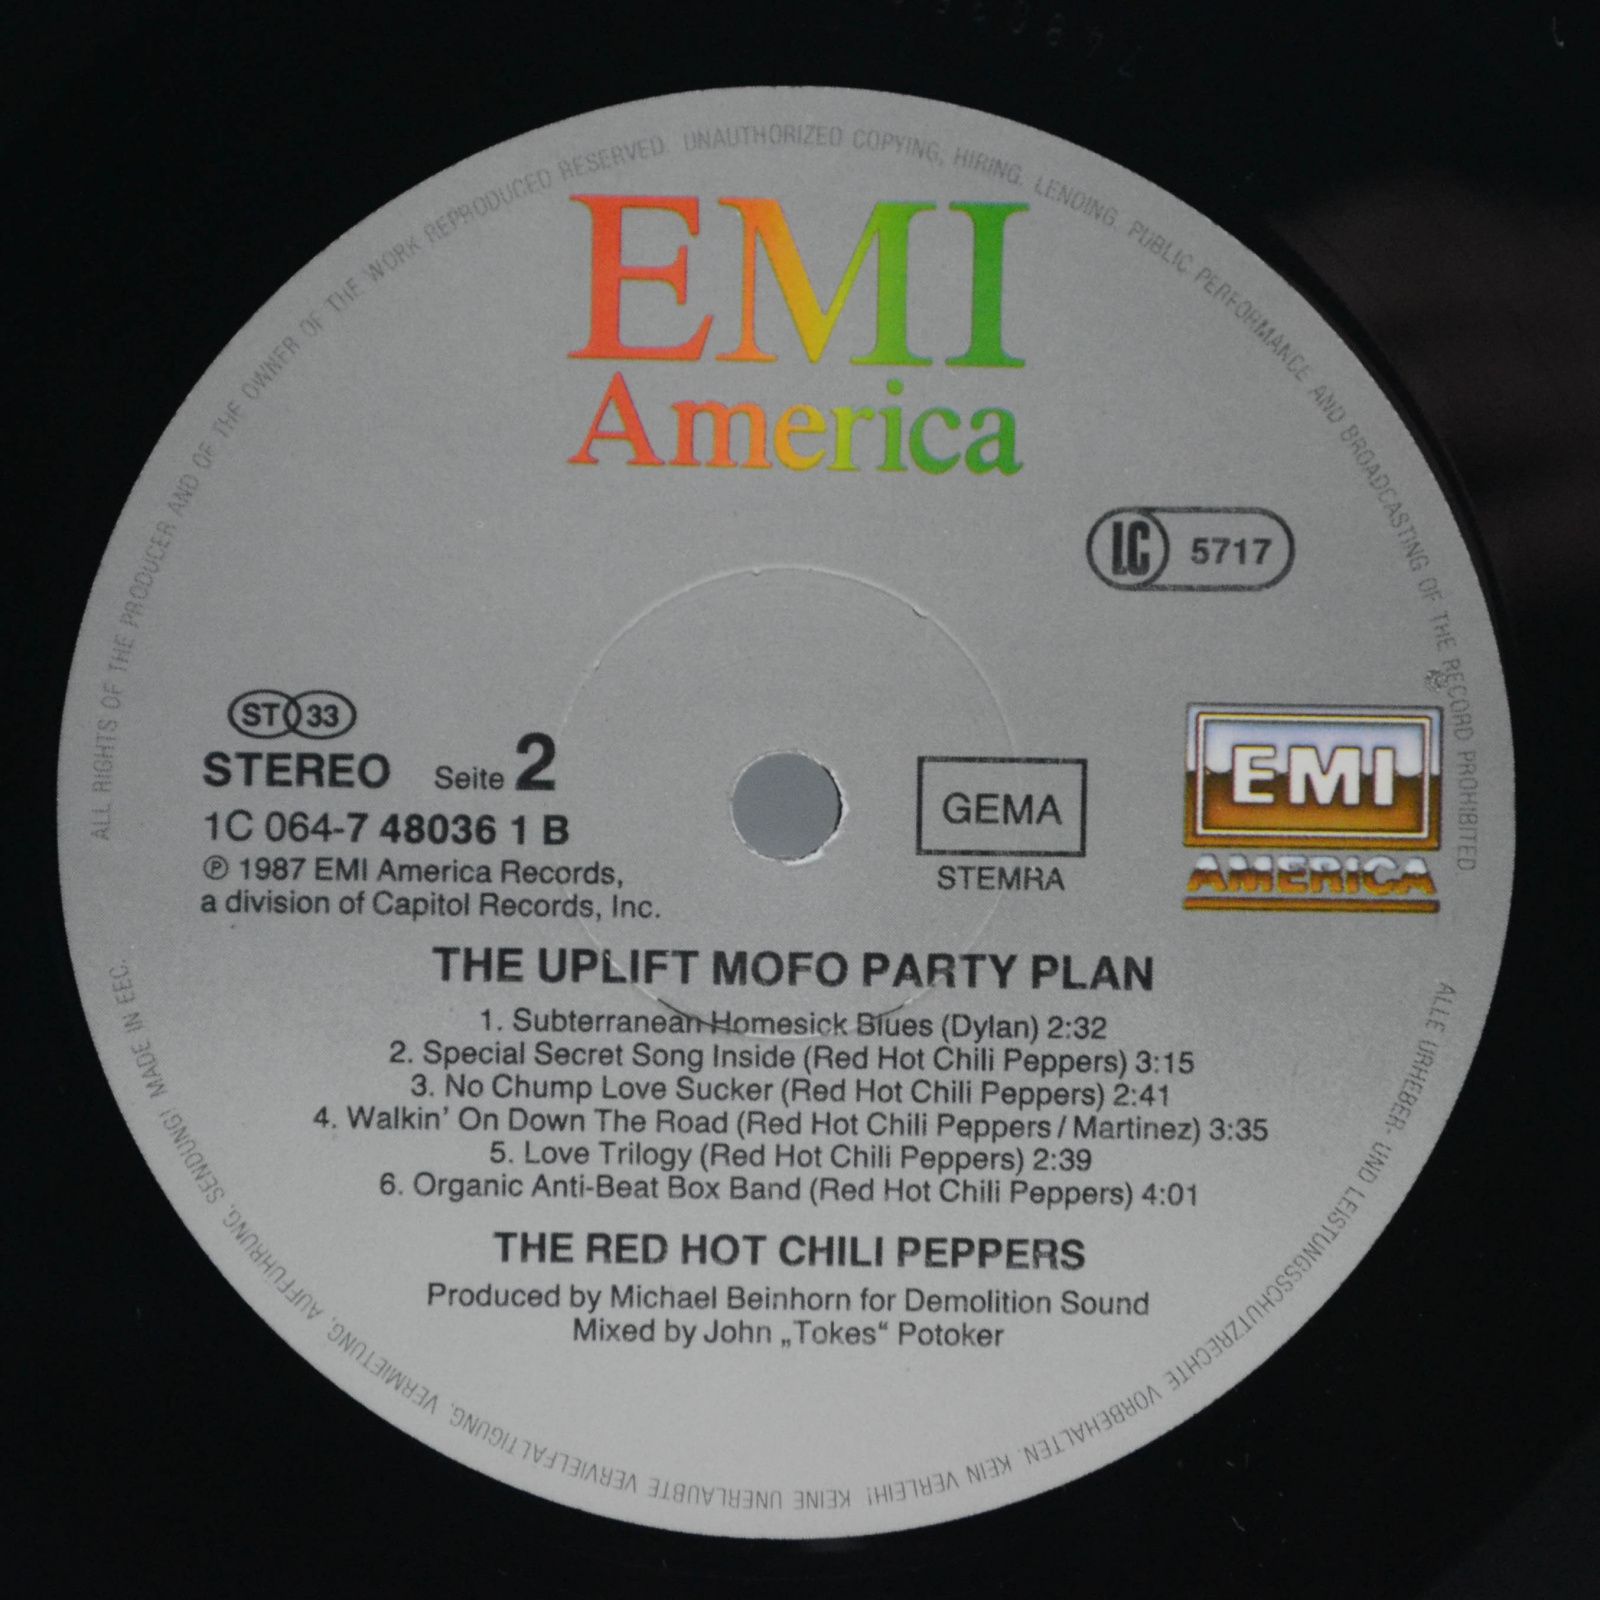 Red Hot Chili Peppers — The Uplift Mofo Party Plan, 1987